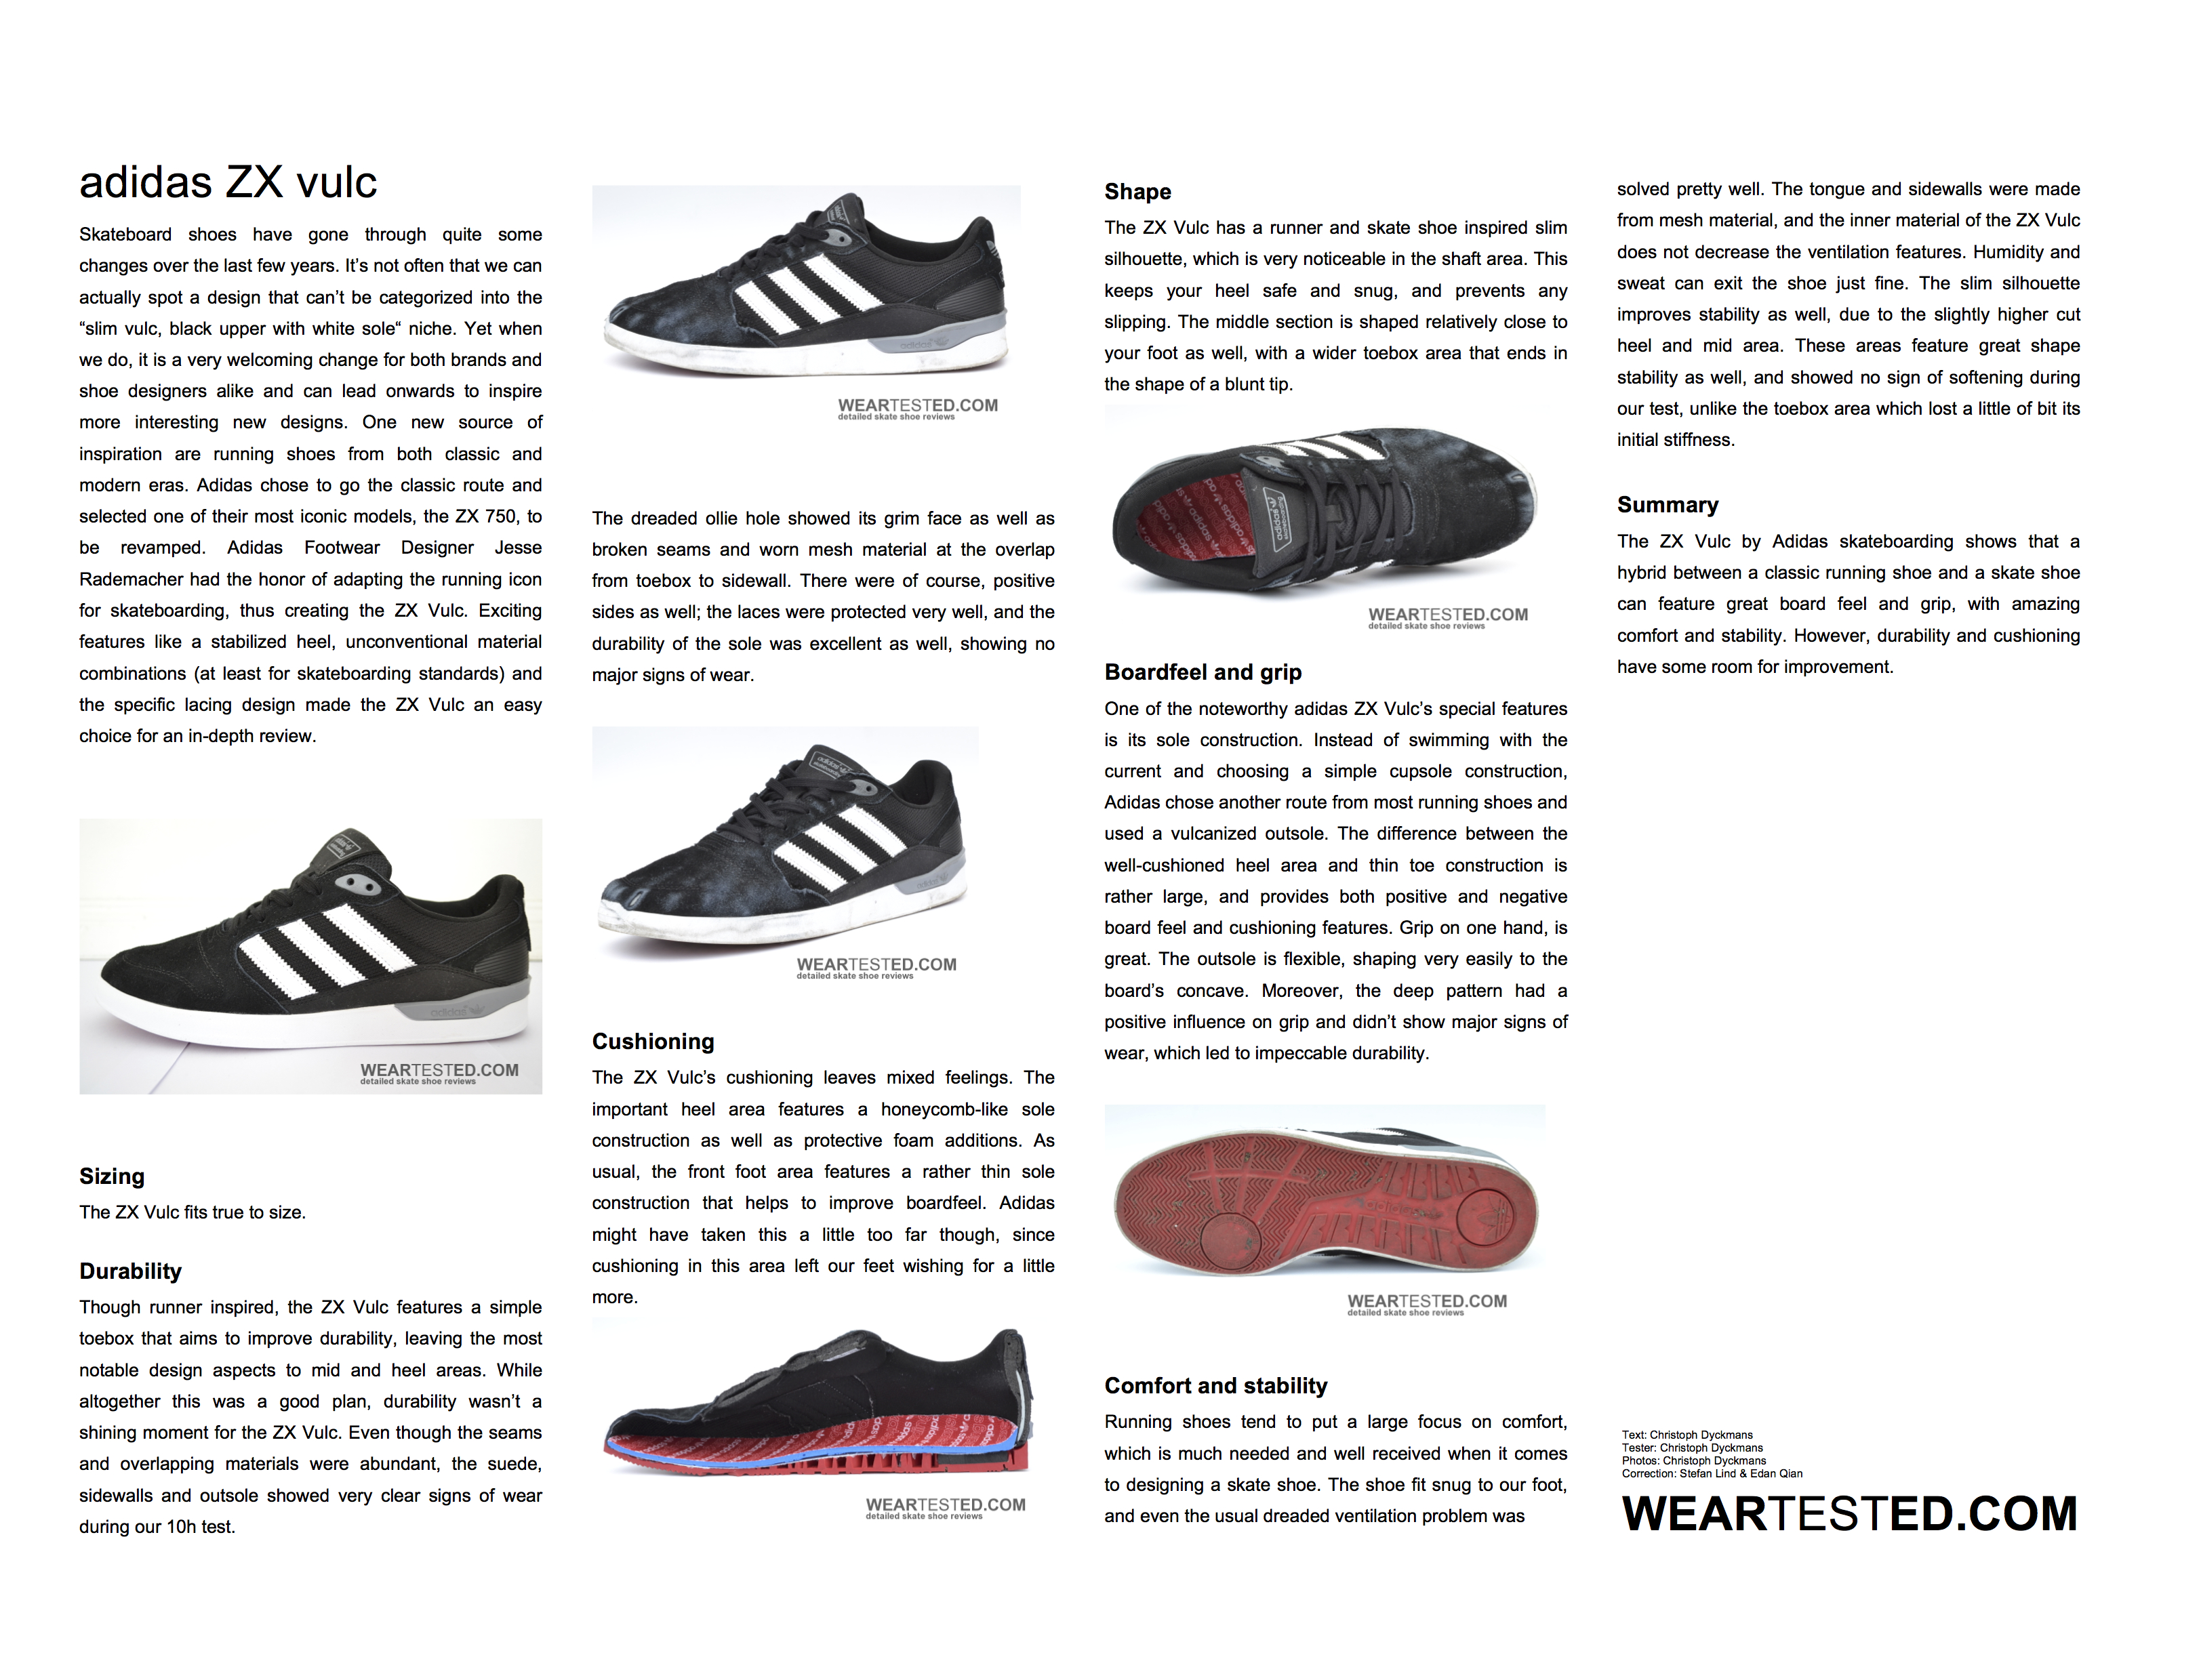 adidas vulc - Weartested - detailed skate